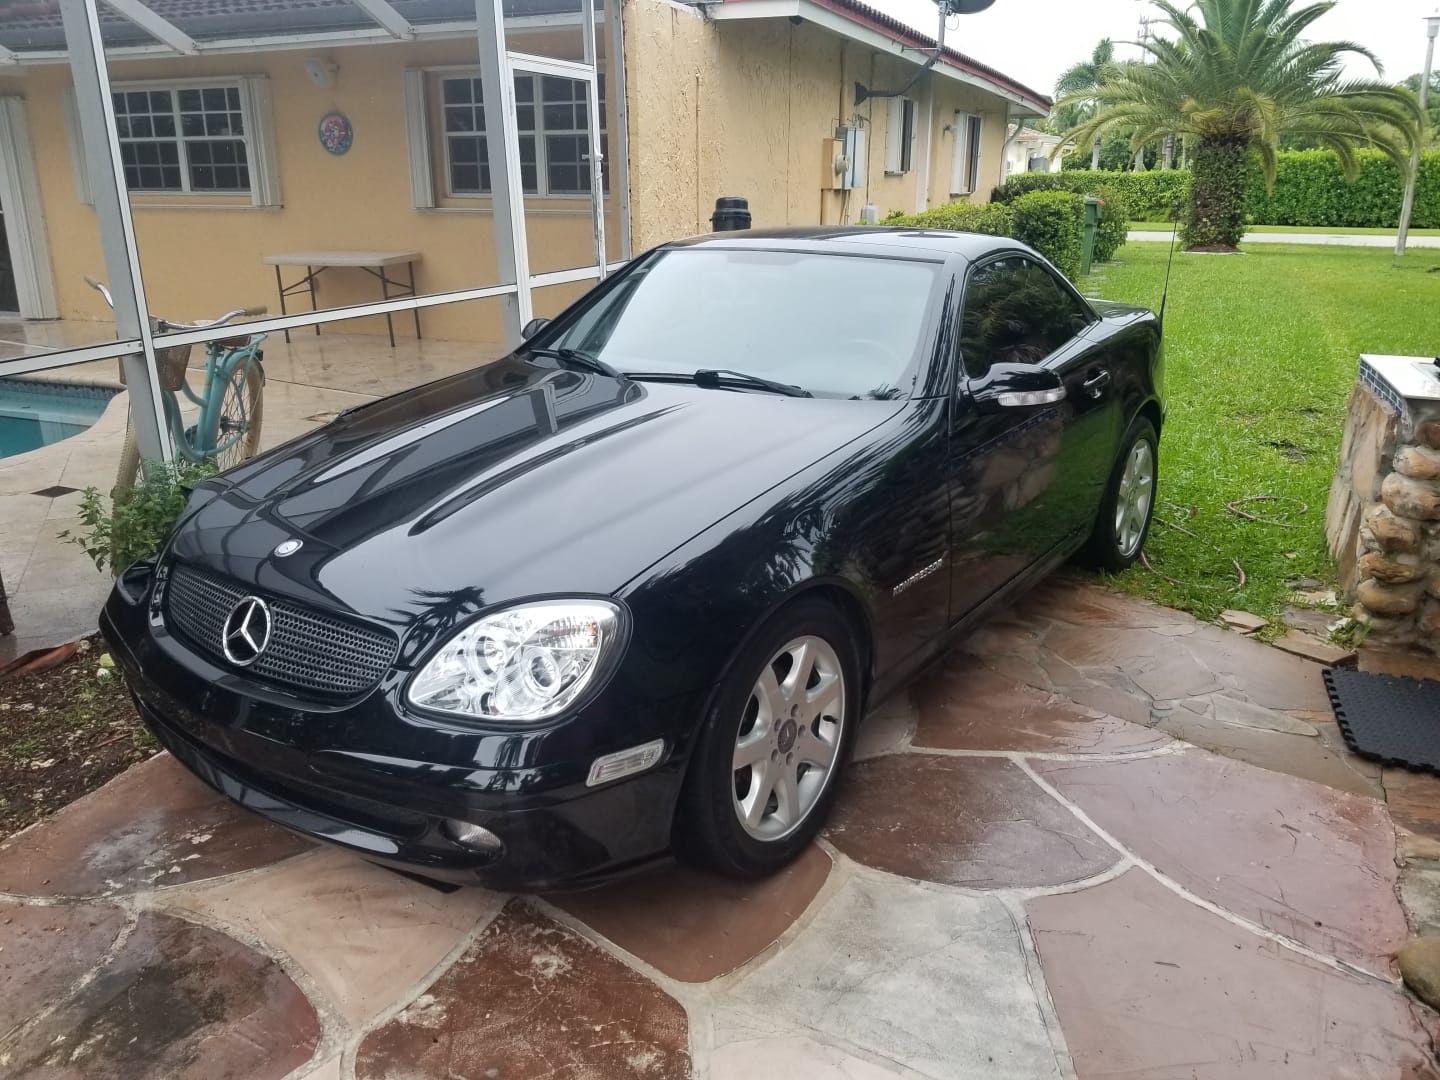 For parts Mercedes Benz SLK everything is perfect